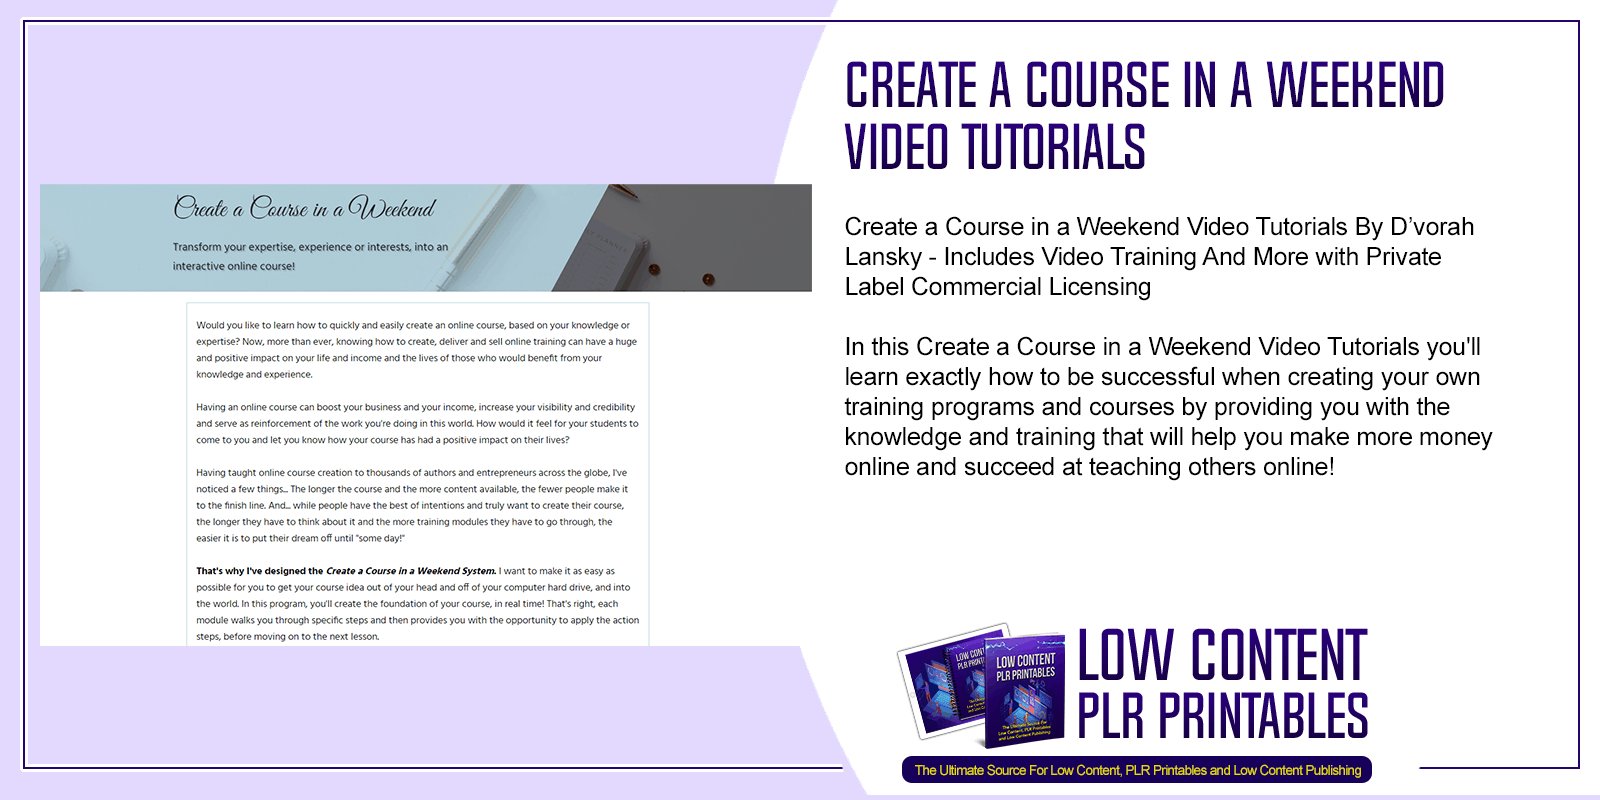 Create a Course in a Weekend Video Tutorials